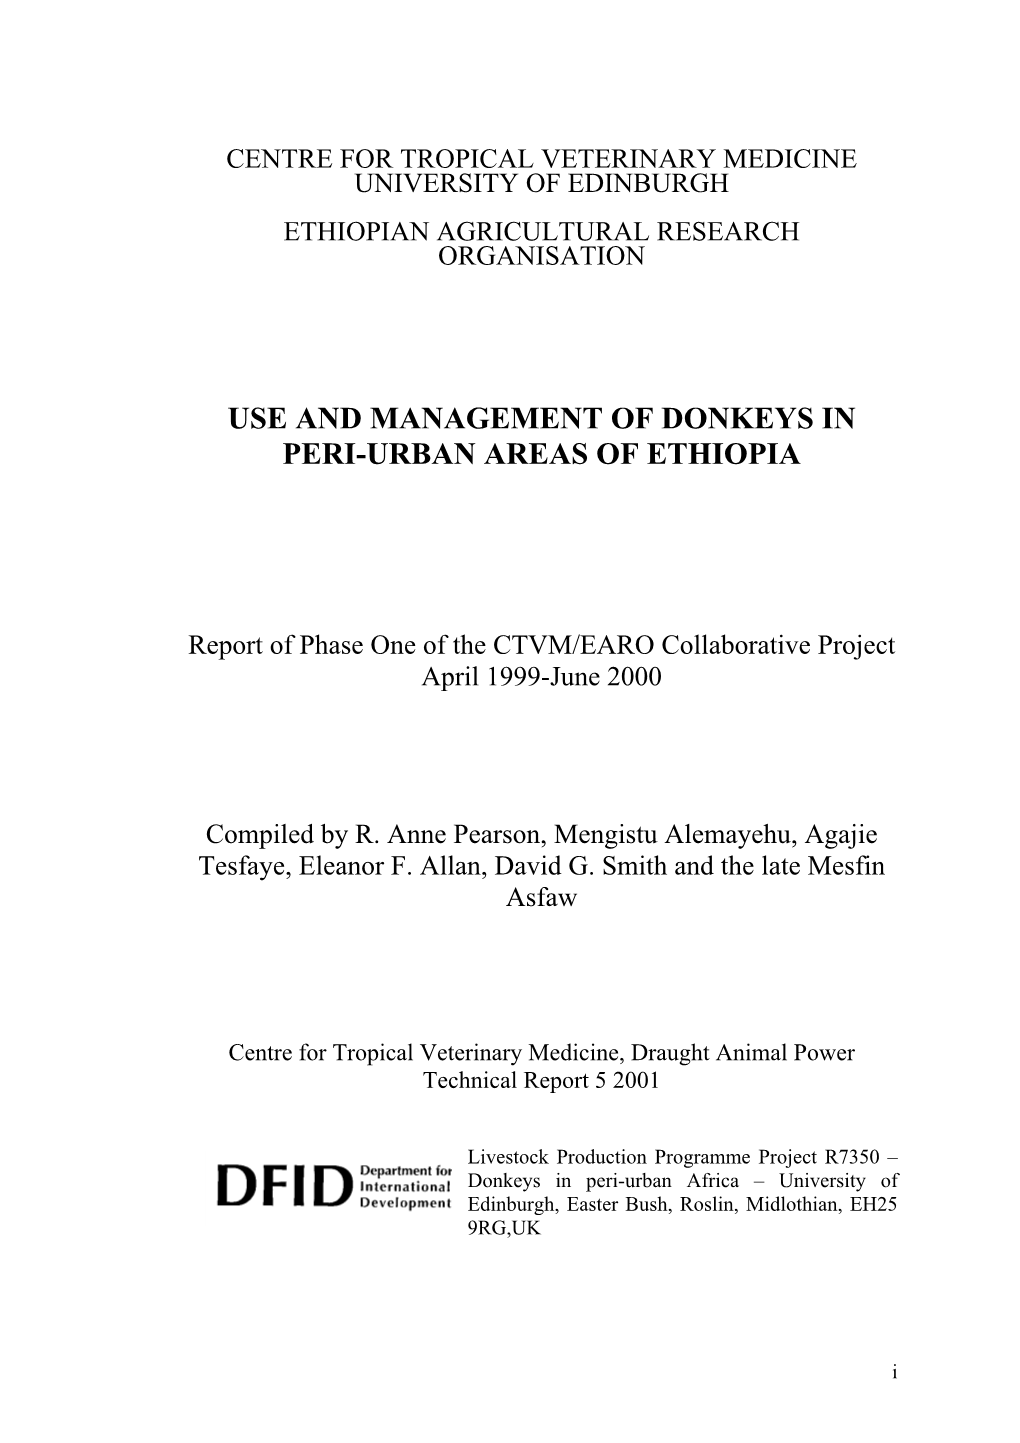 Use and Management of Donkeys in Peri-Urban Areas of Ethiopia